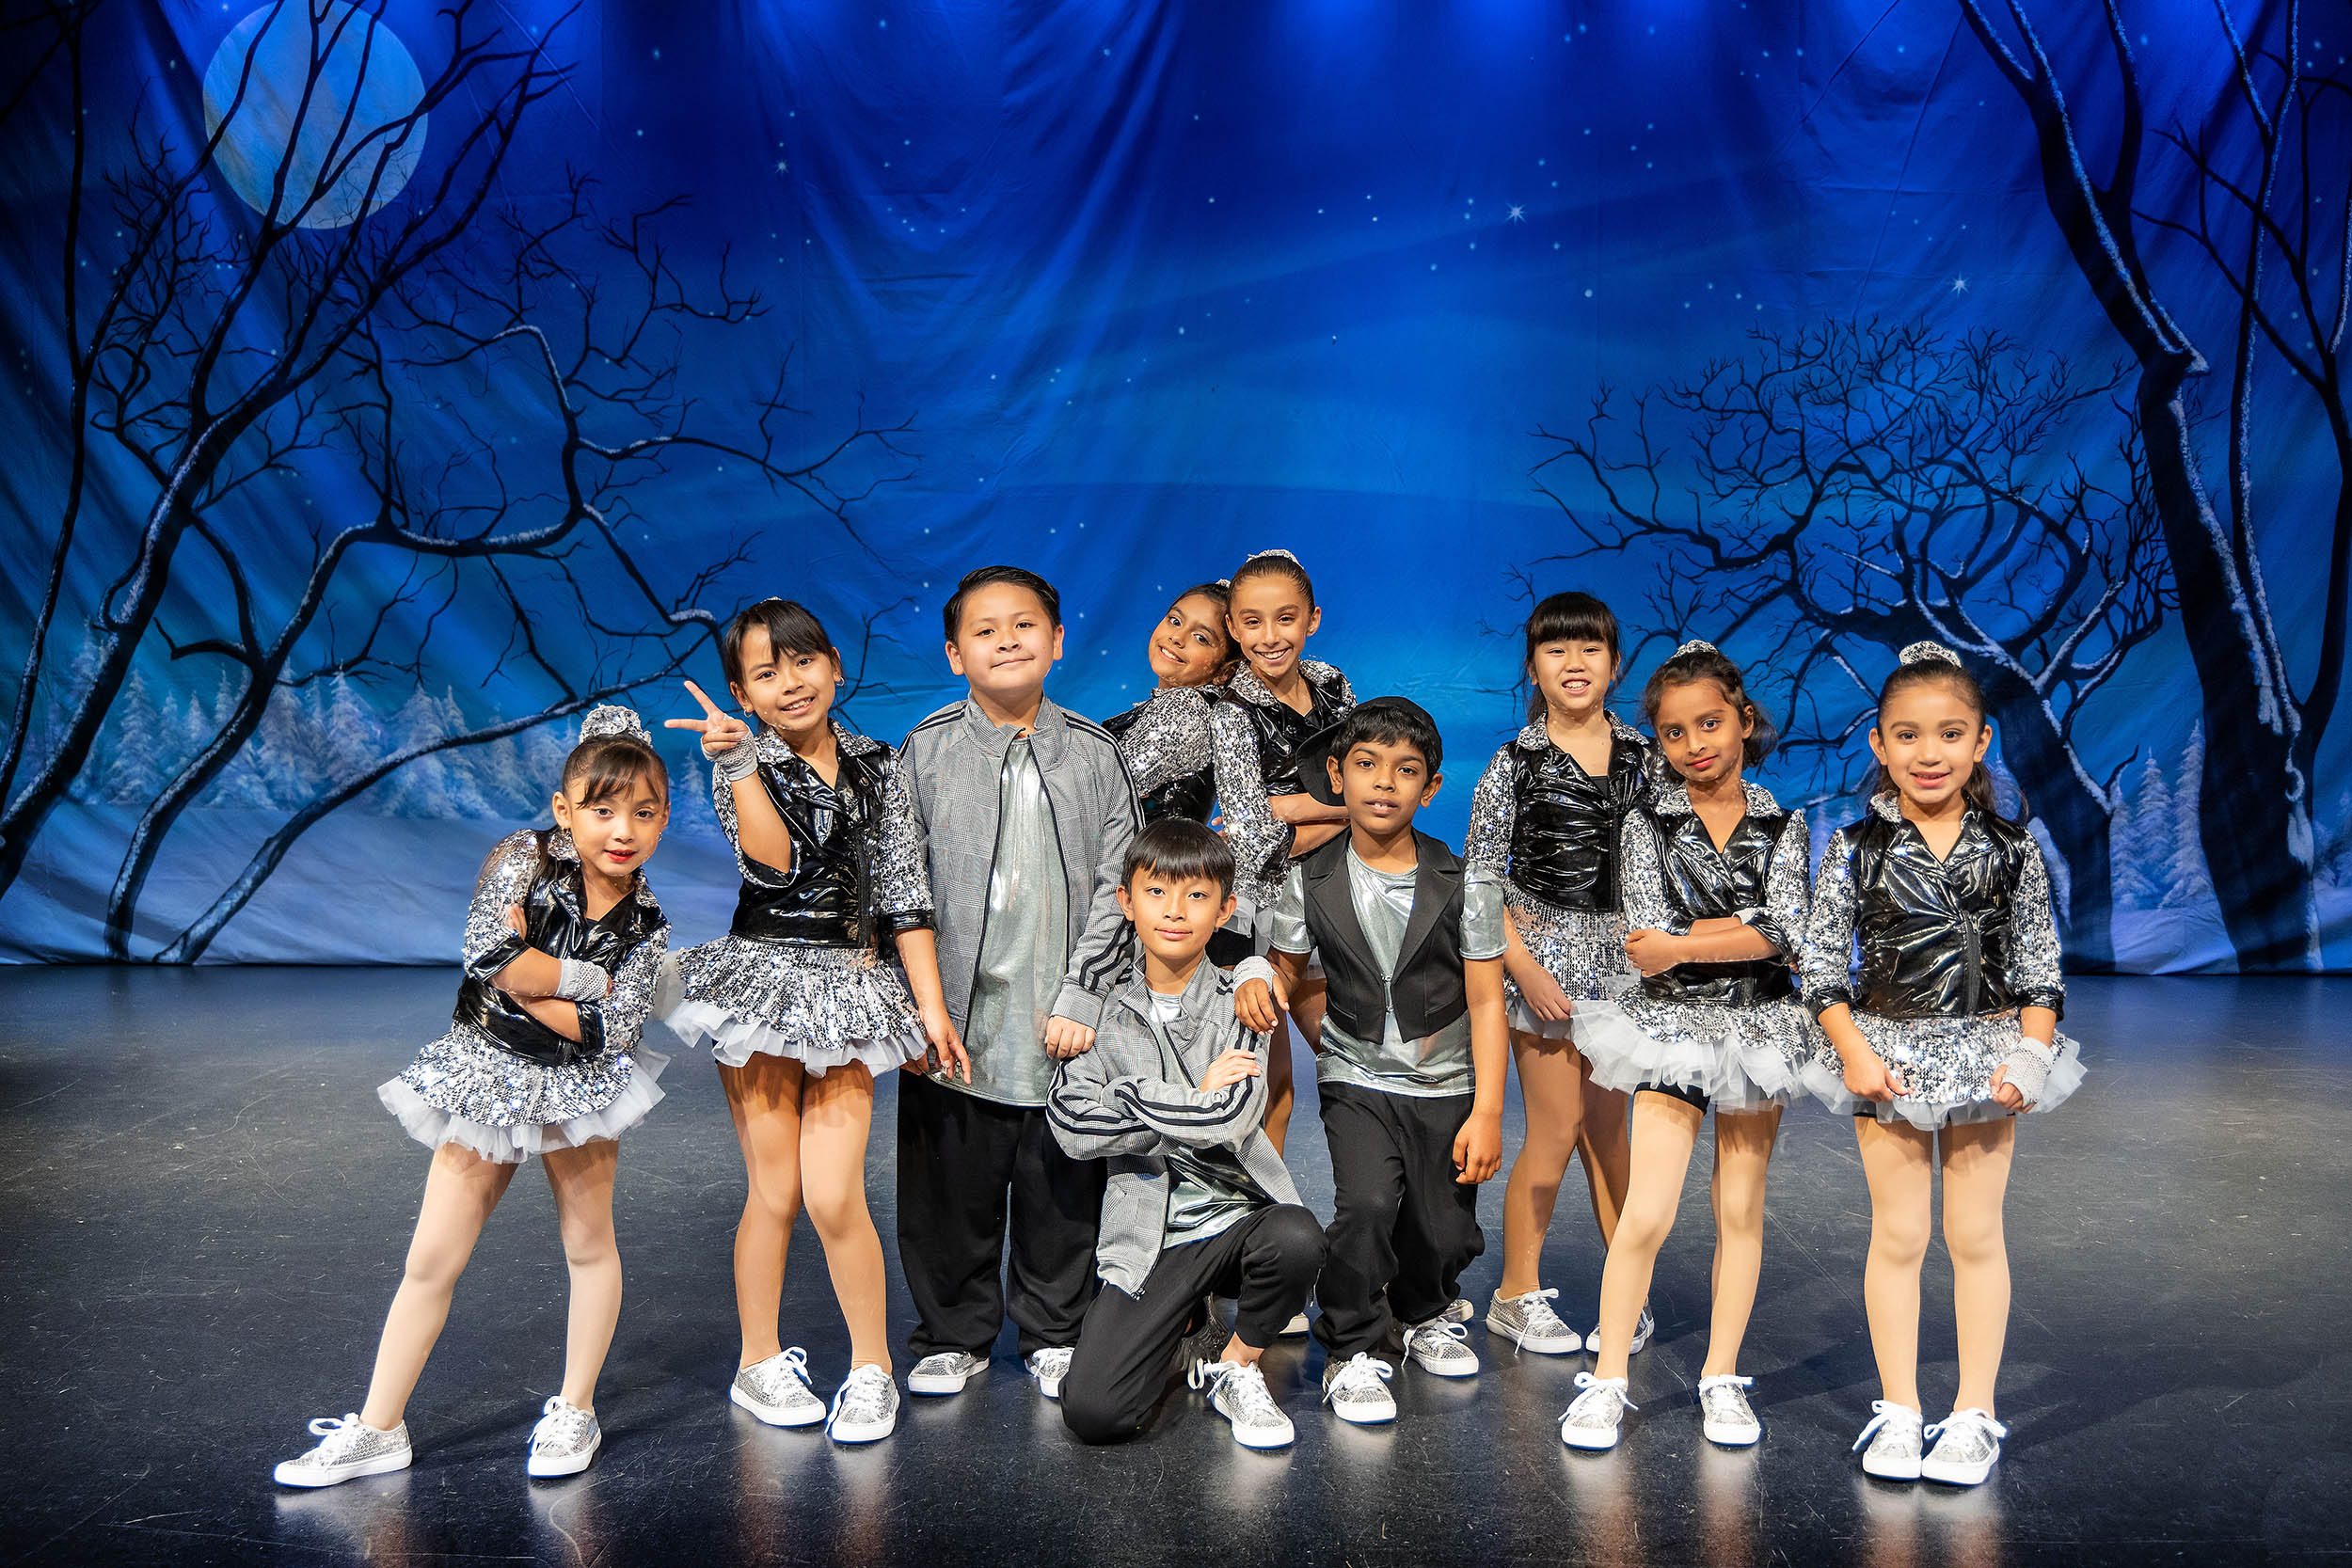 Music Lessons - Dance Classes - piano studio - ballet academy - Sunnyvale Cupertino Mountain View Milpitas